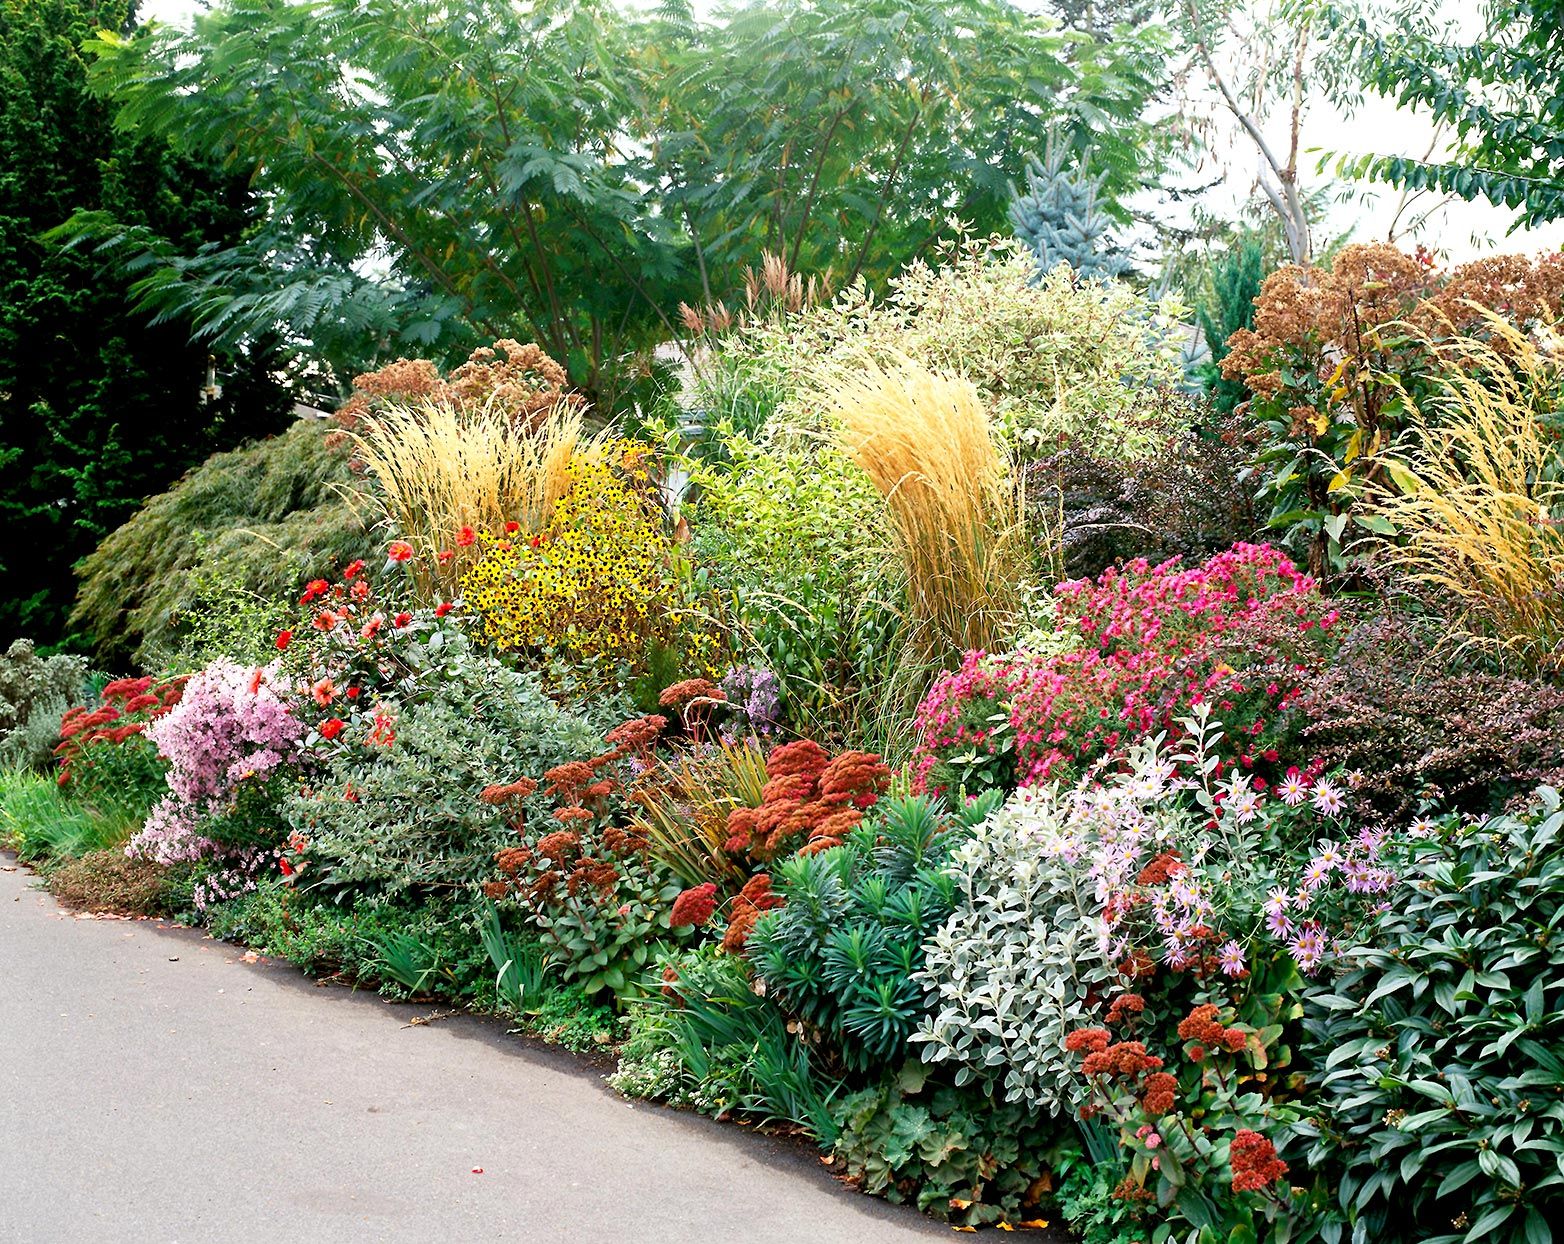 Colorful Xeriscape Landscaping with perennials and mulch to help reduce weeds